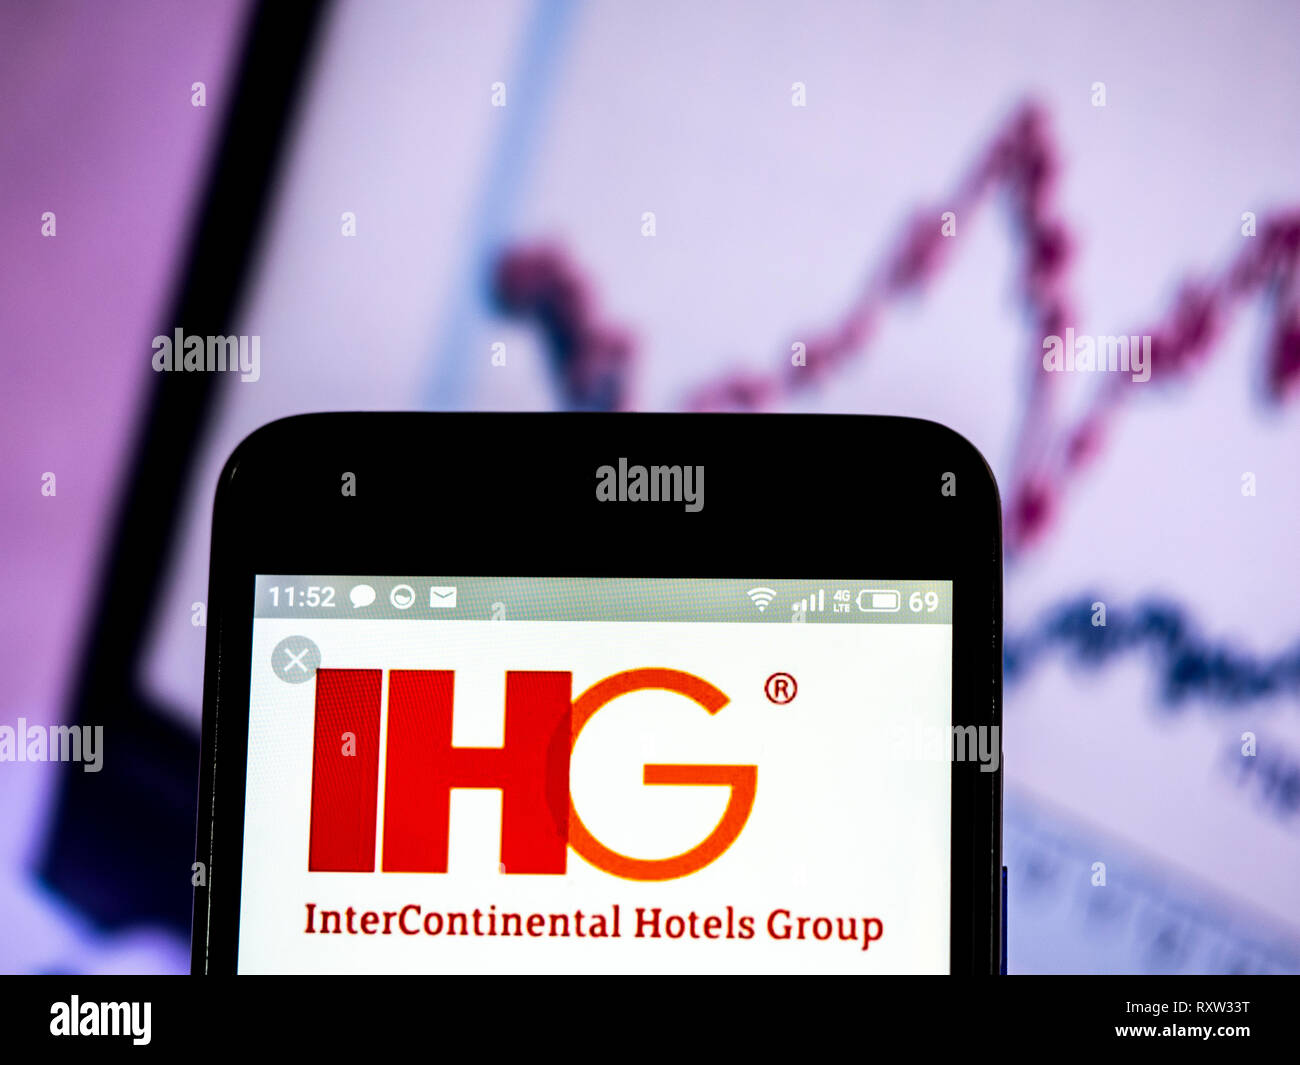 Intercontinental Hotels Group Logo Seen Displayed On Smart Phone